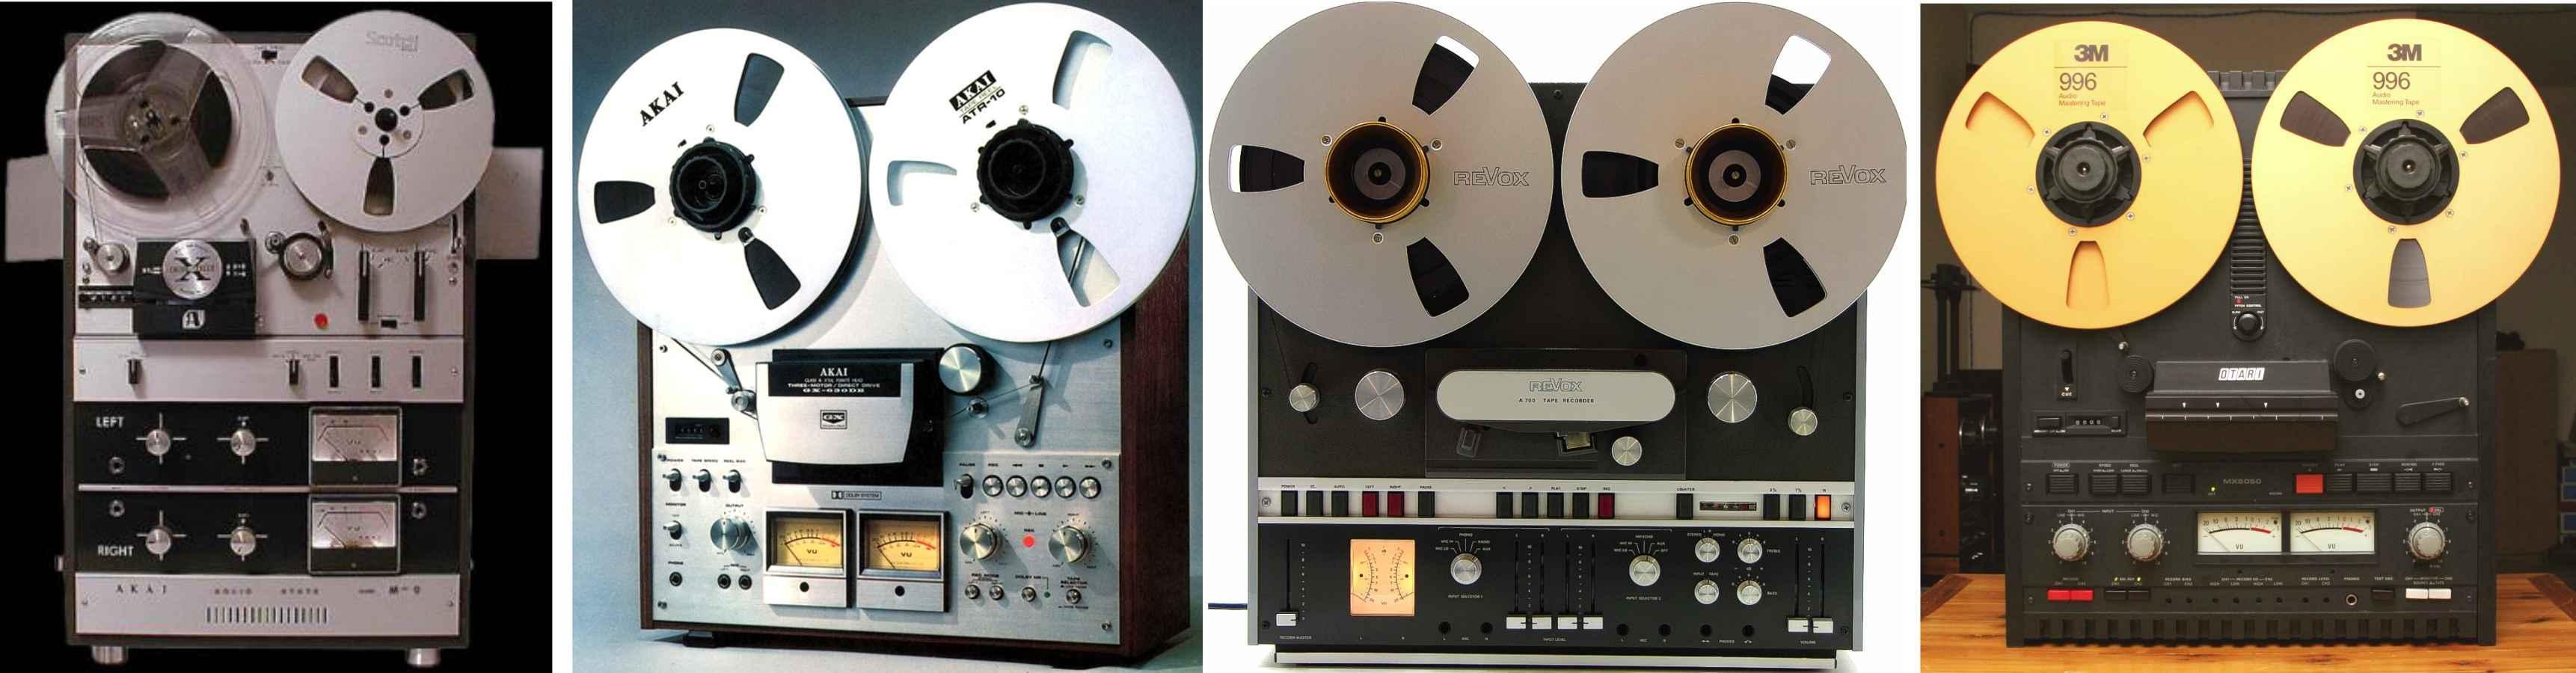 Newbie question about types of tape. : r/ReelToReel